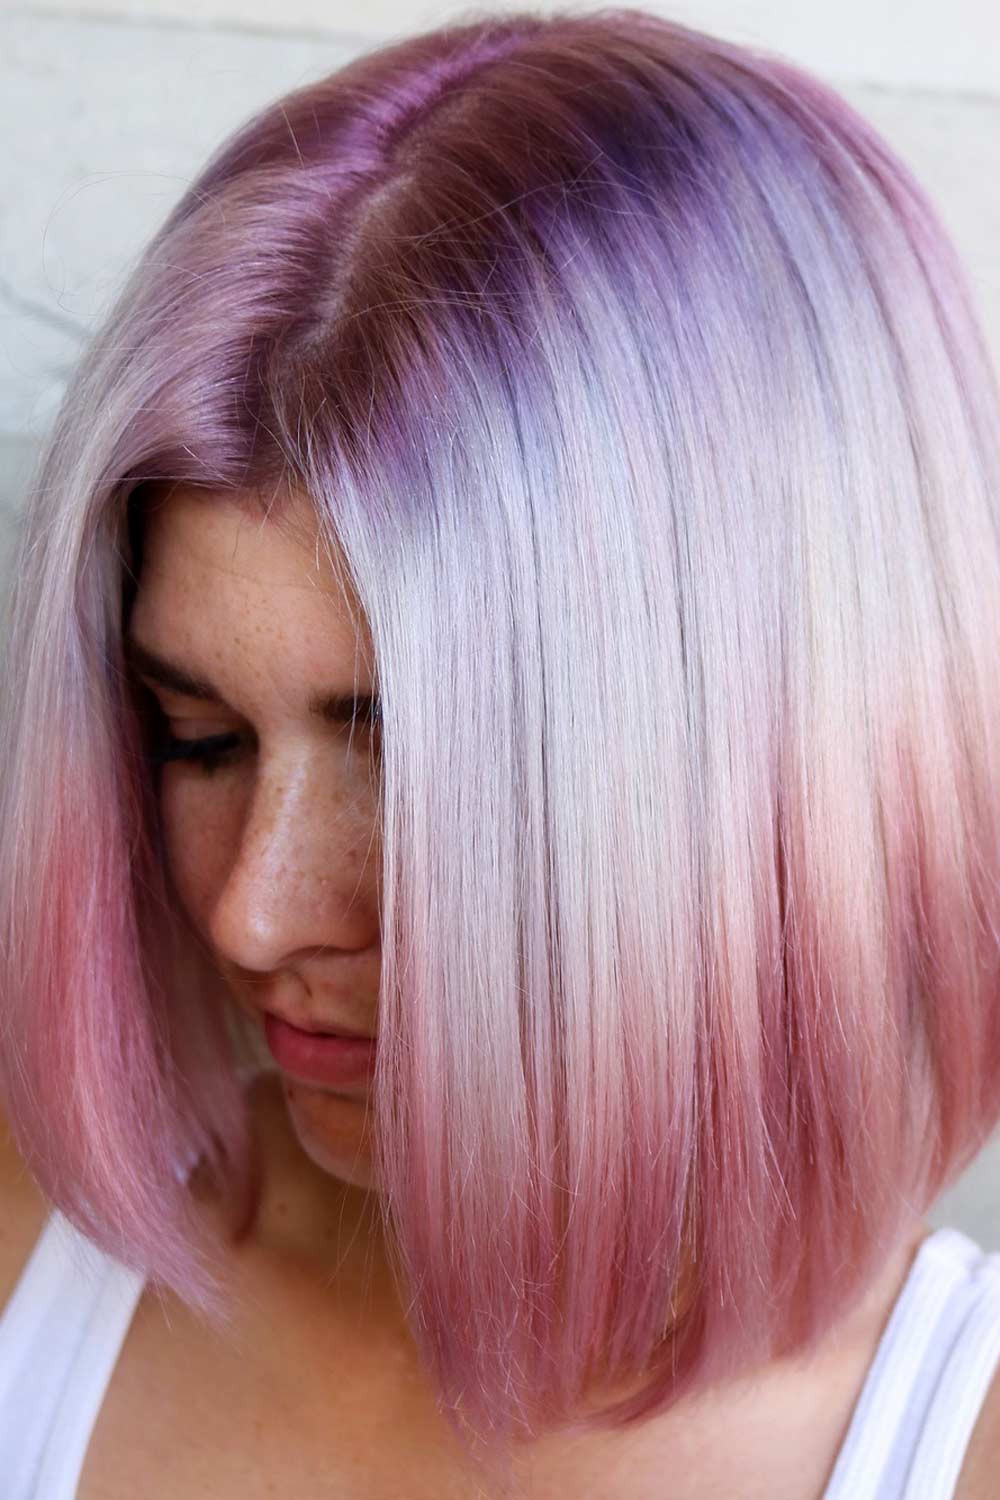 In a color-melt ombré, multiple colors are used to create a smooth, melted effect